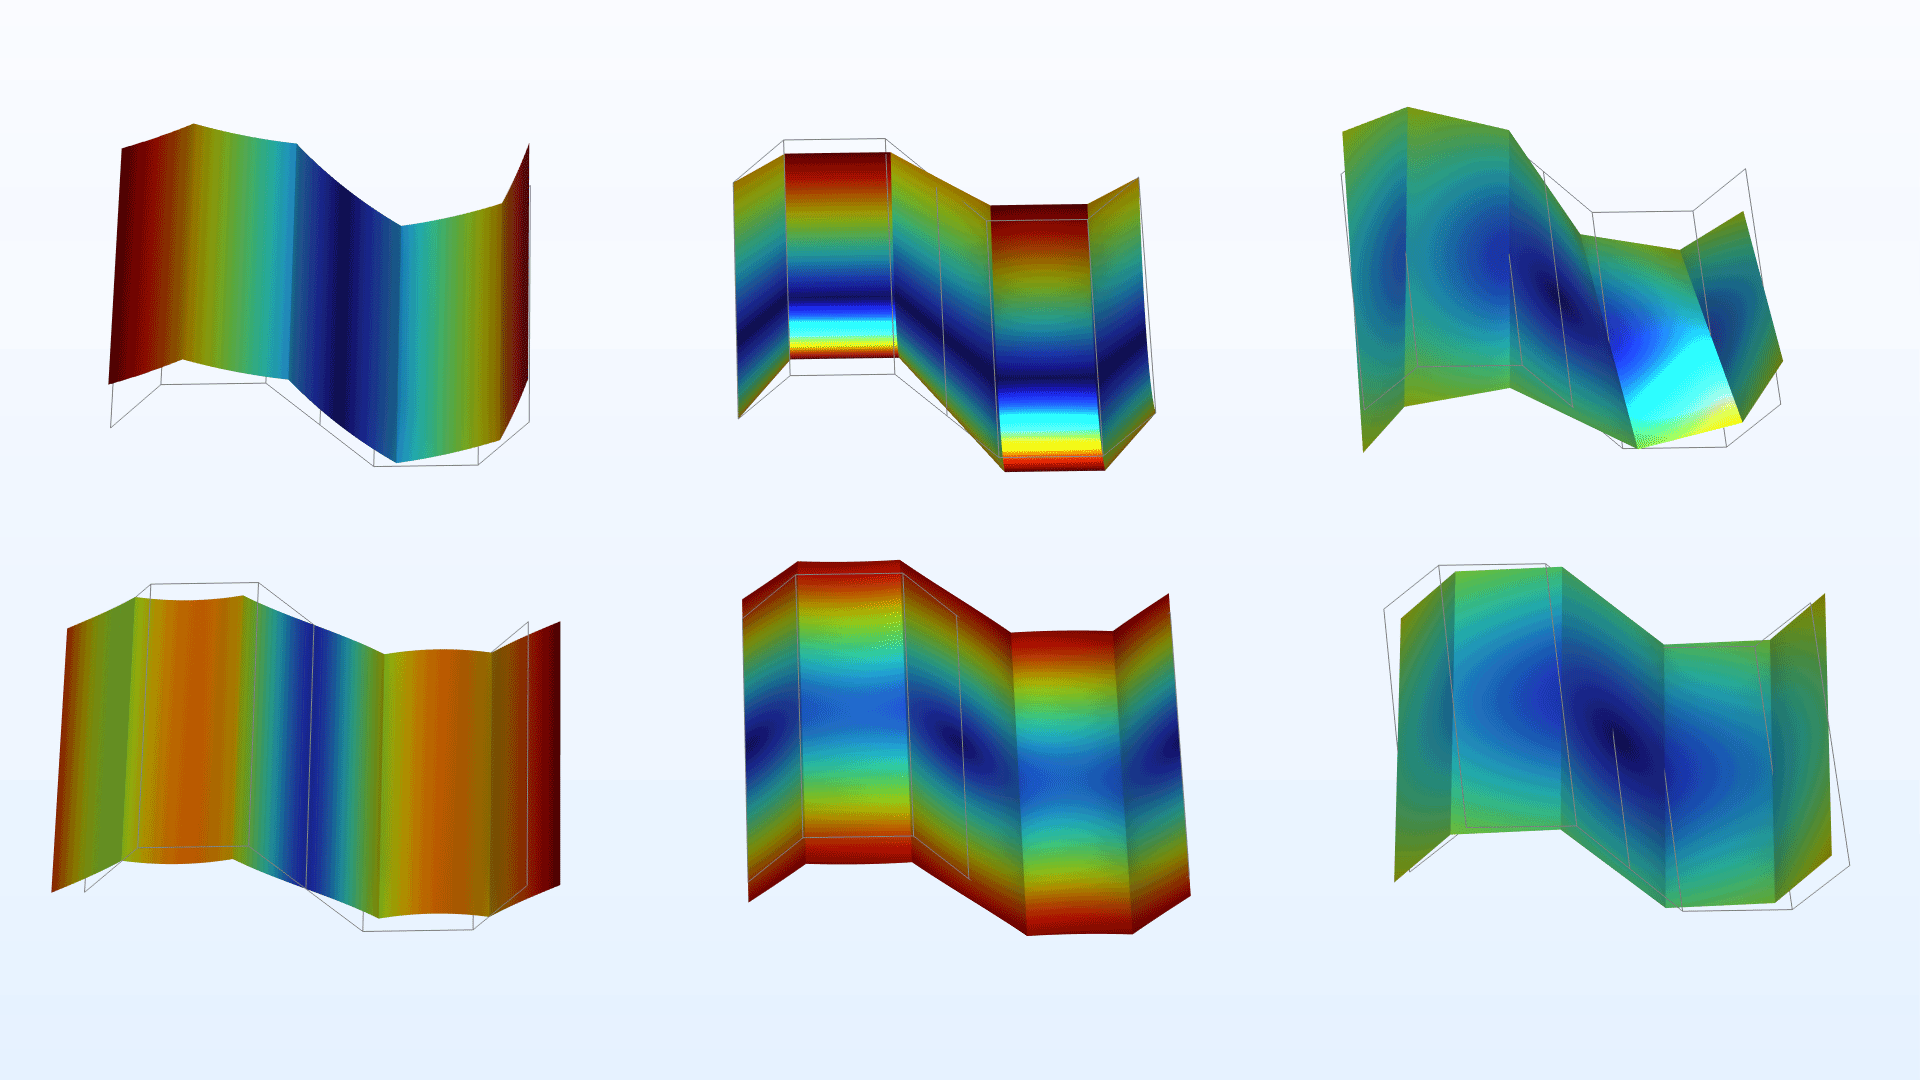 Six plots of a corrugated sheet model in the Rainbow color table.